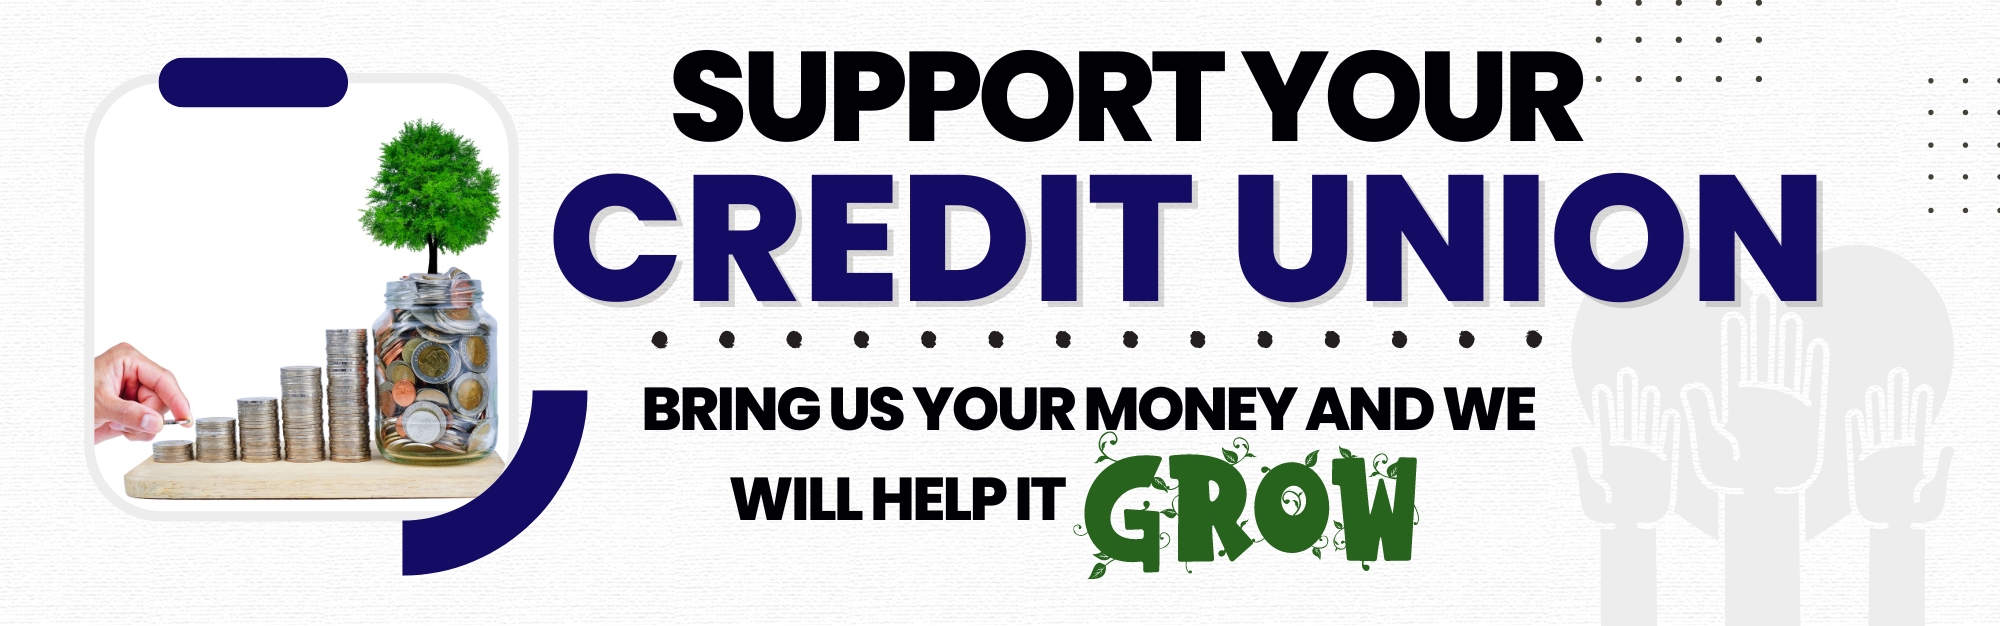 Support your credit union